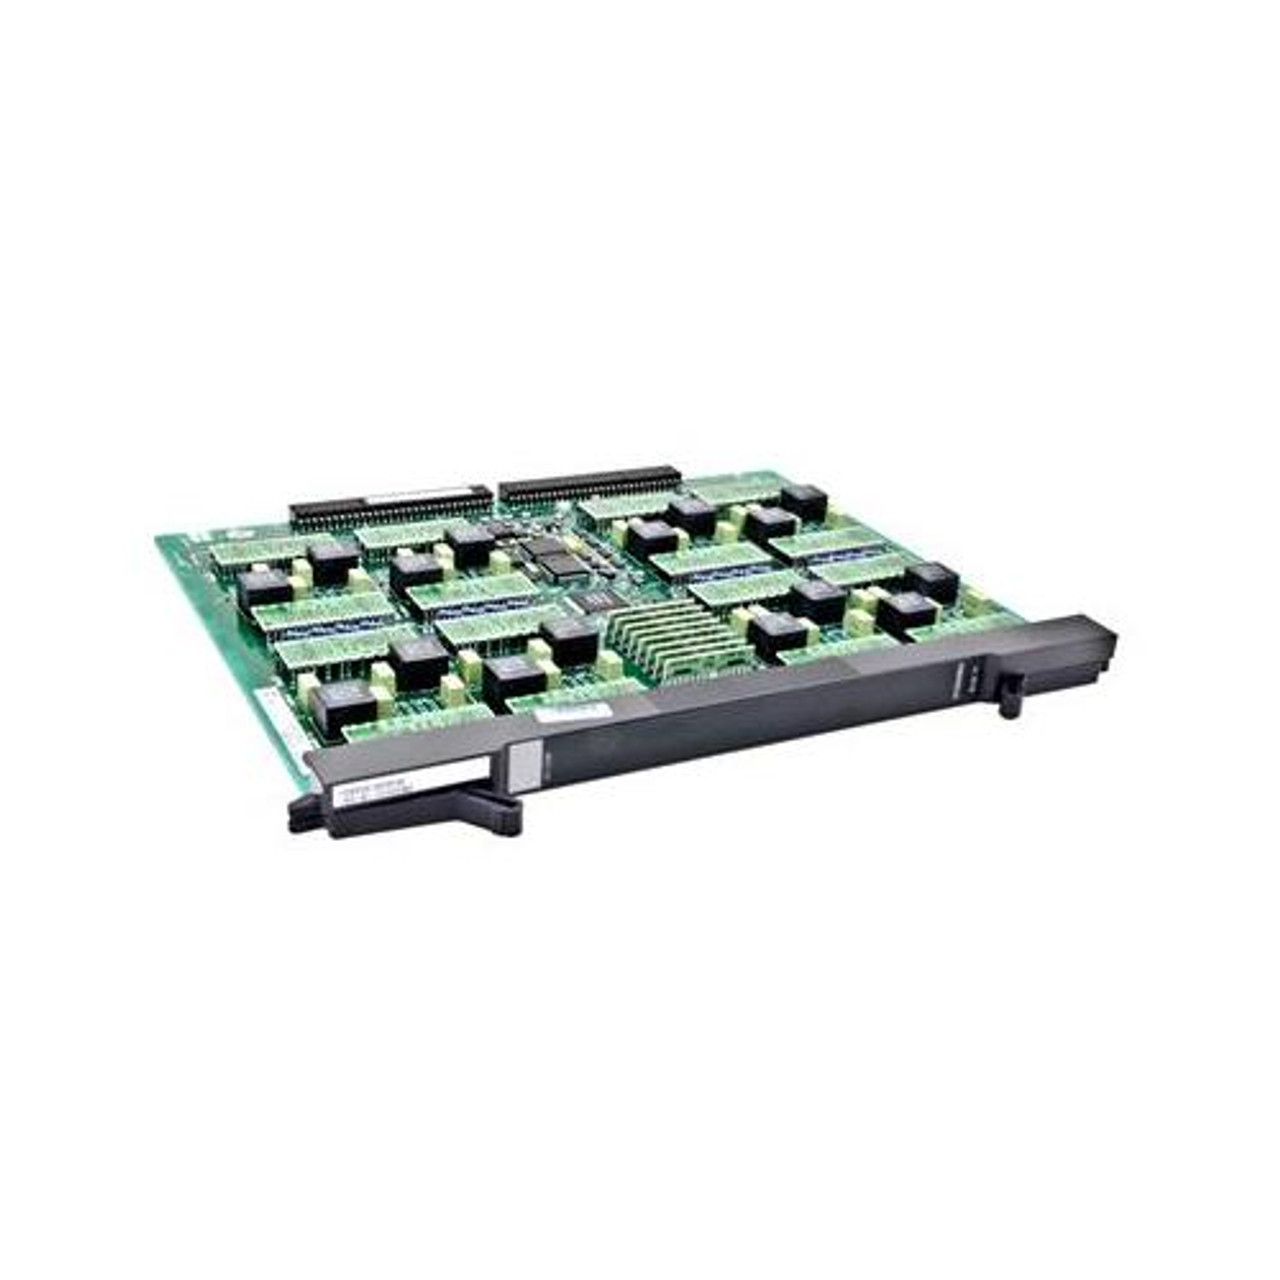 10S50V Force10 48-port 10/100/1000Base-T chassis with POE four SFP ports two modular AC No uplink